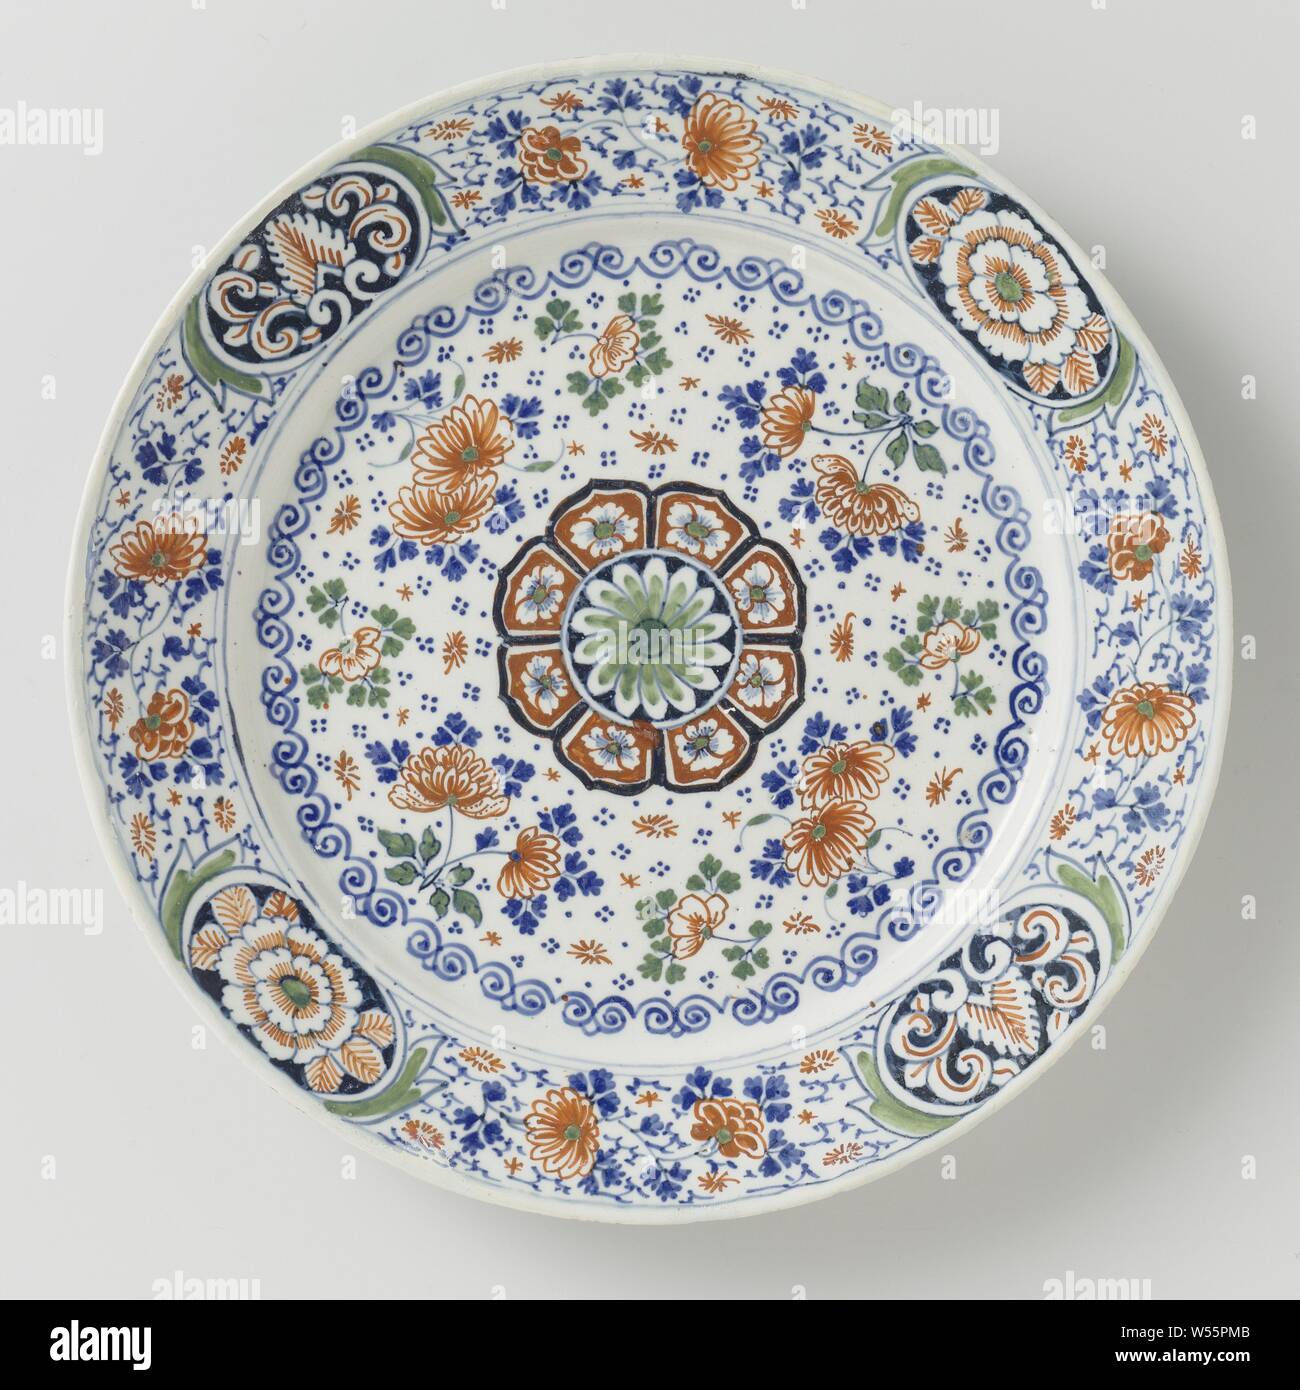 Plate with flower decorations and scatter flowers, Plate of earthenware, front and back covered with white tin glaze. Multicolored painting on the front with a rosette in green, red, black and blue on the flat and scattered flowers in red, green and blue. The border is decorated with four medallions in which a floral pattern in red, green and dark blue, with scattered flowers in between., anonymous, Delft, c. 1700 - c. 1725, d 22.0 cm × h 2.5 cm Stock Photo